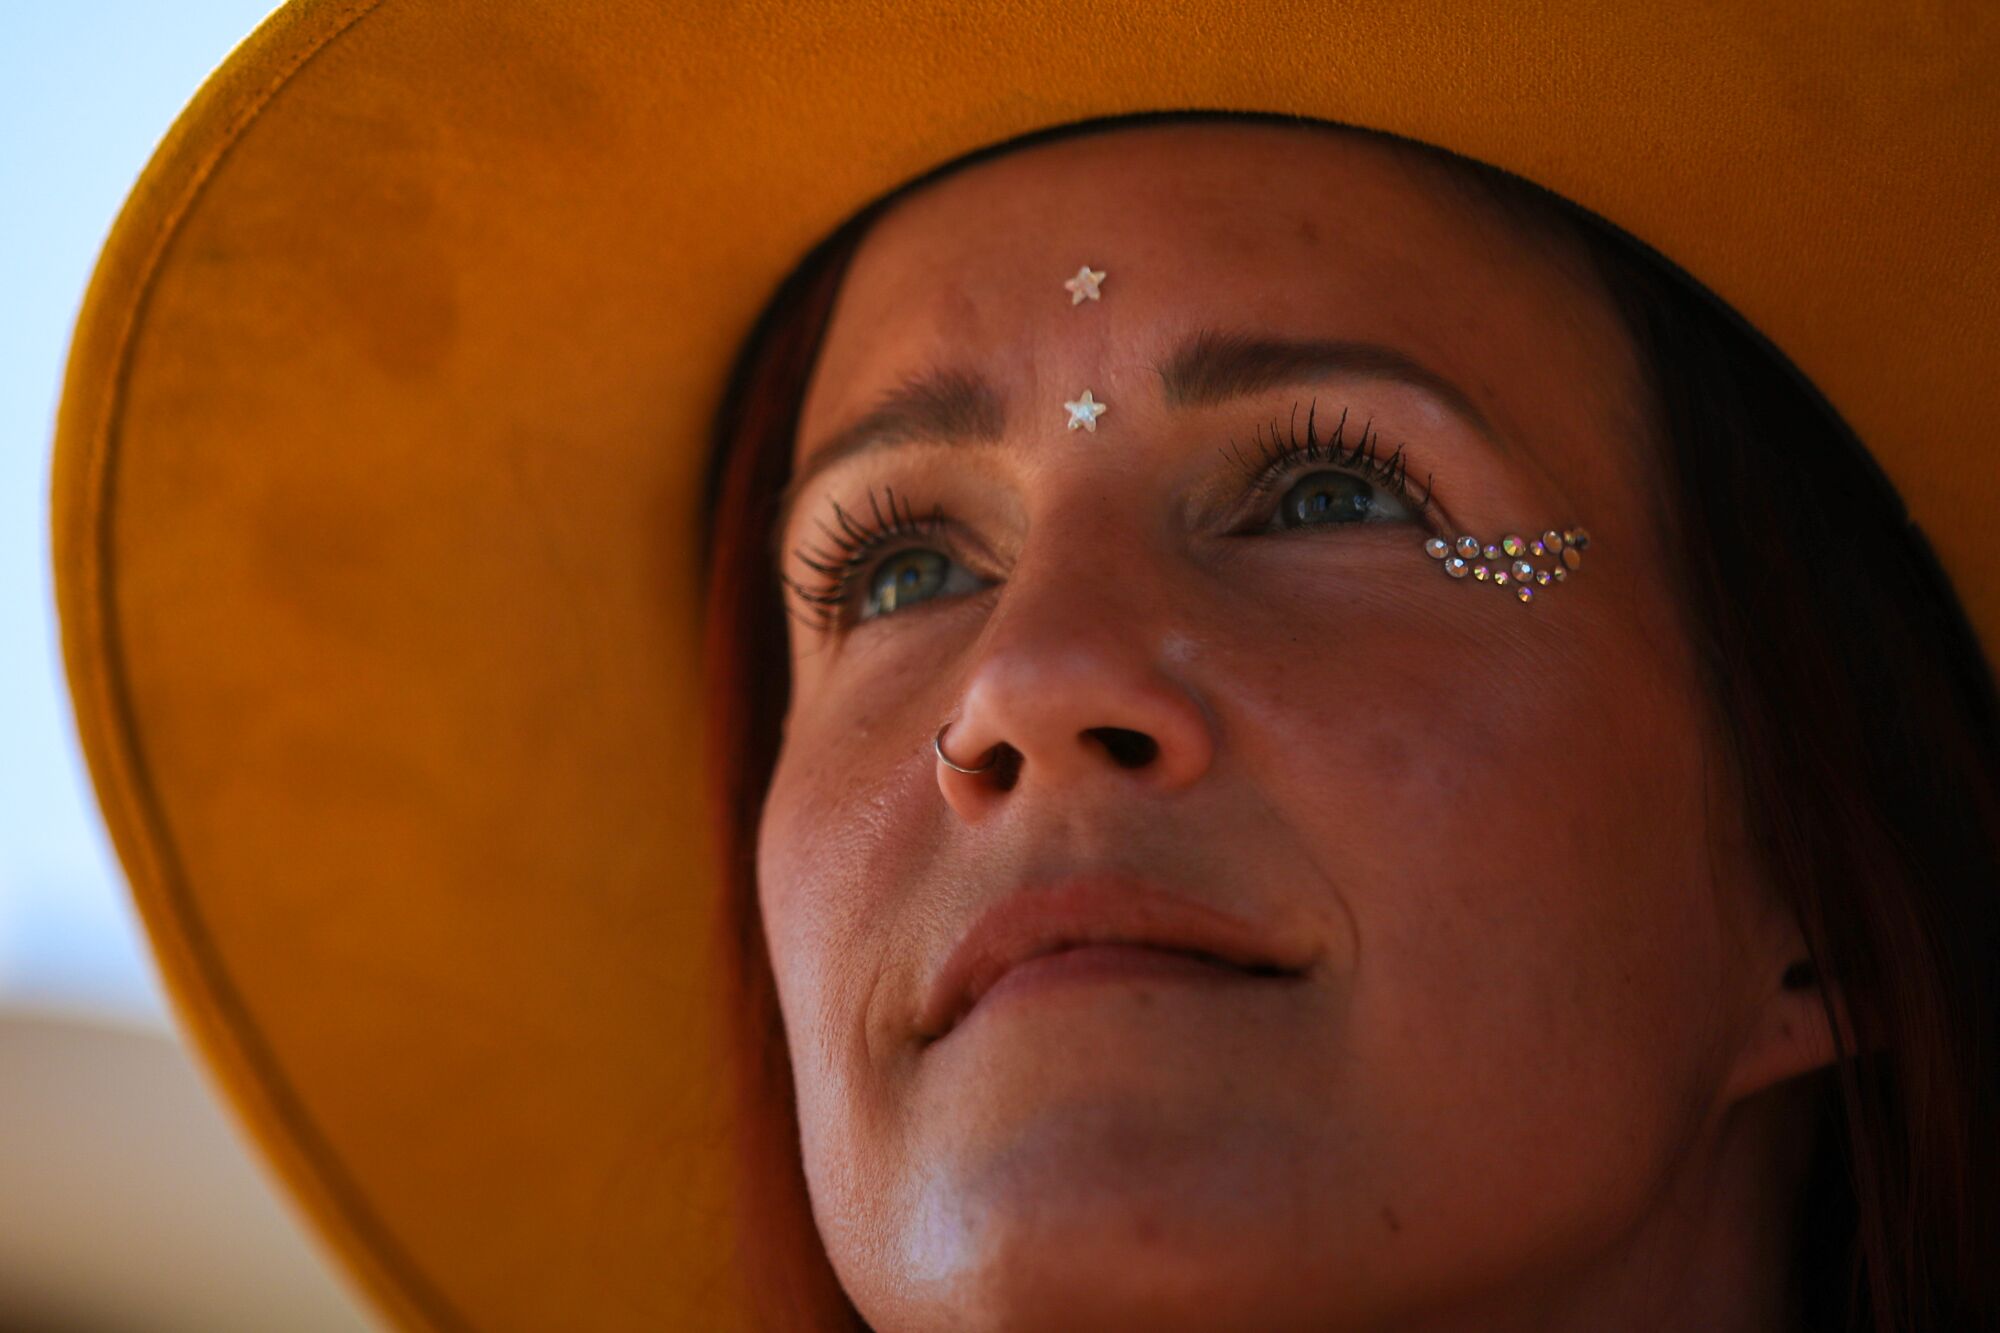 A close-up of a rapt woman in a hat.